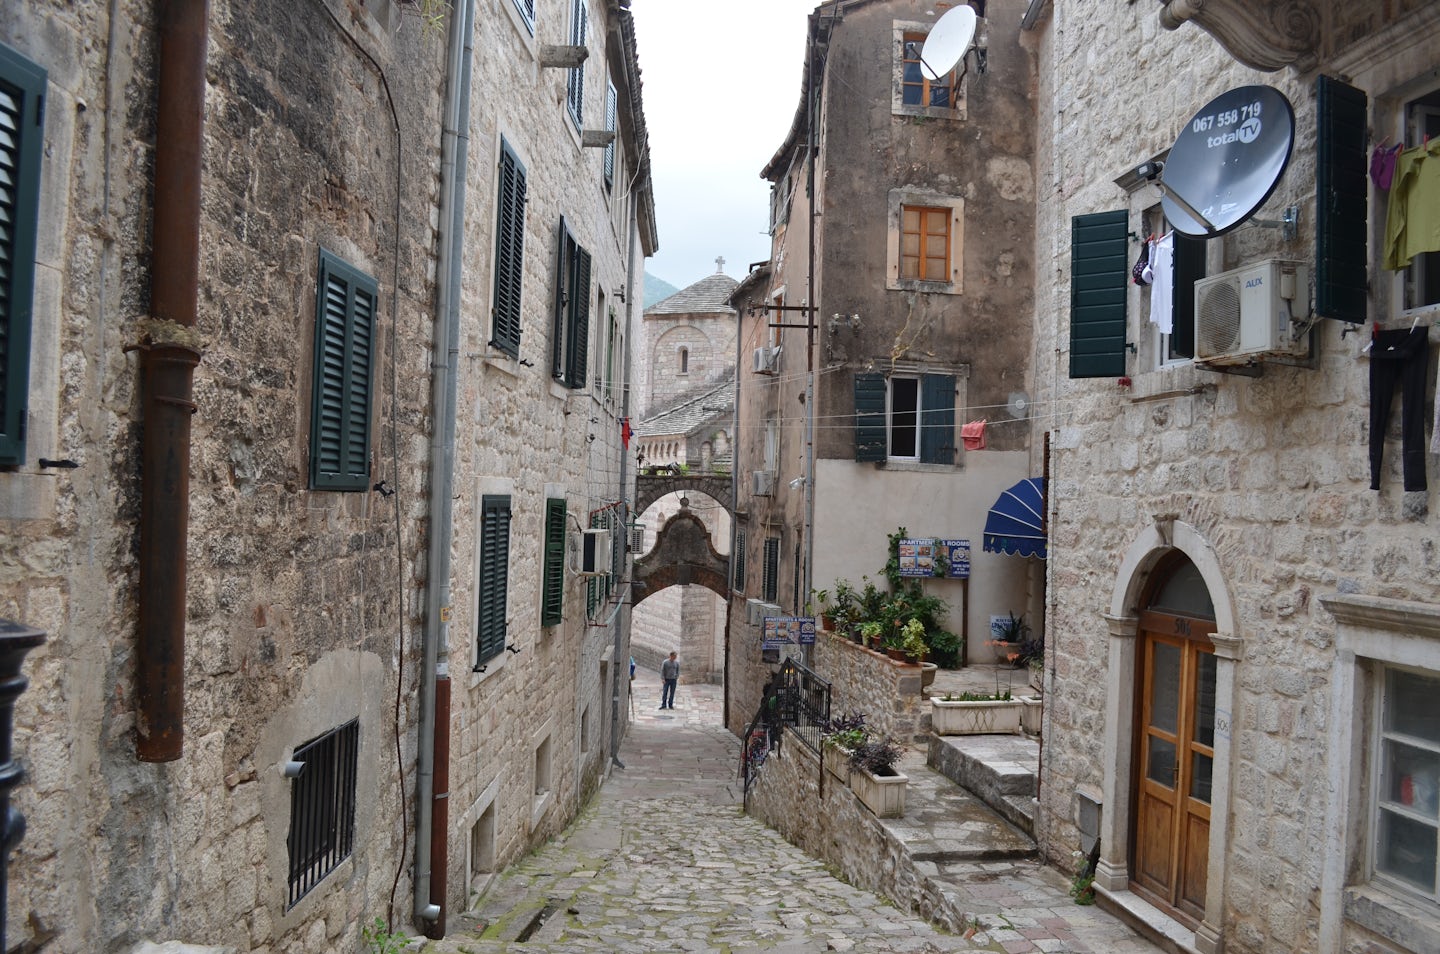 This is a photo of Kotor, Montenegro.  It is one of the interesting little streets and byways as we were roaming around the city!